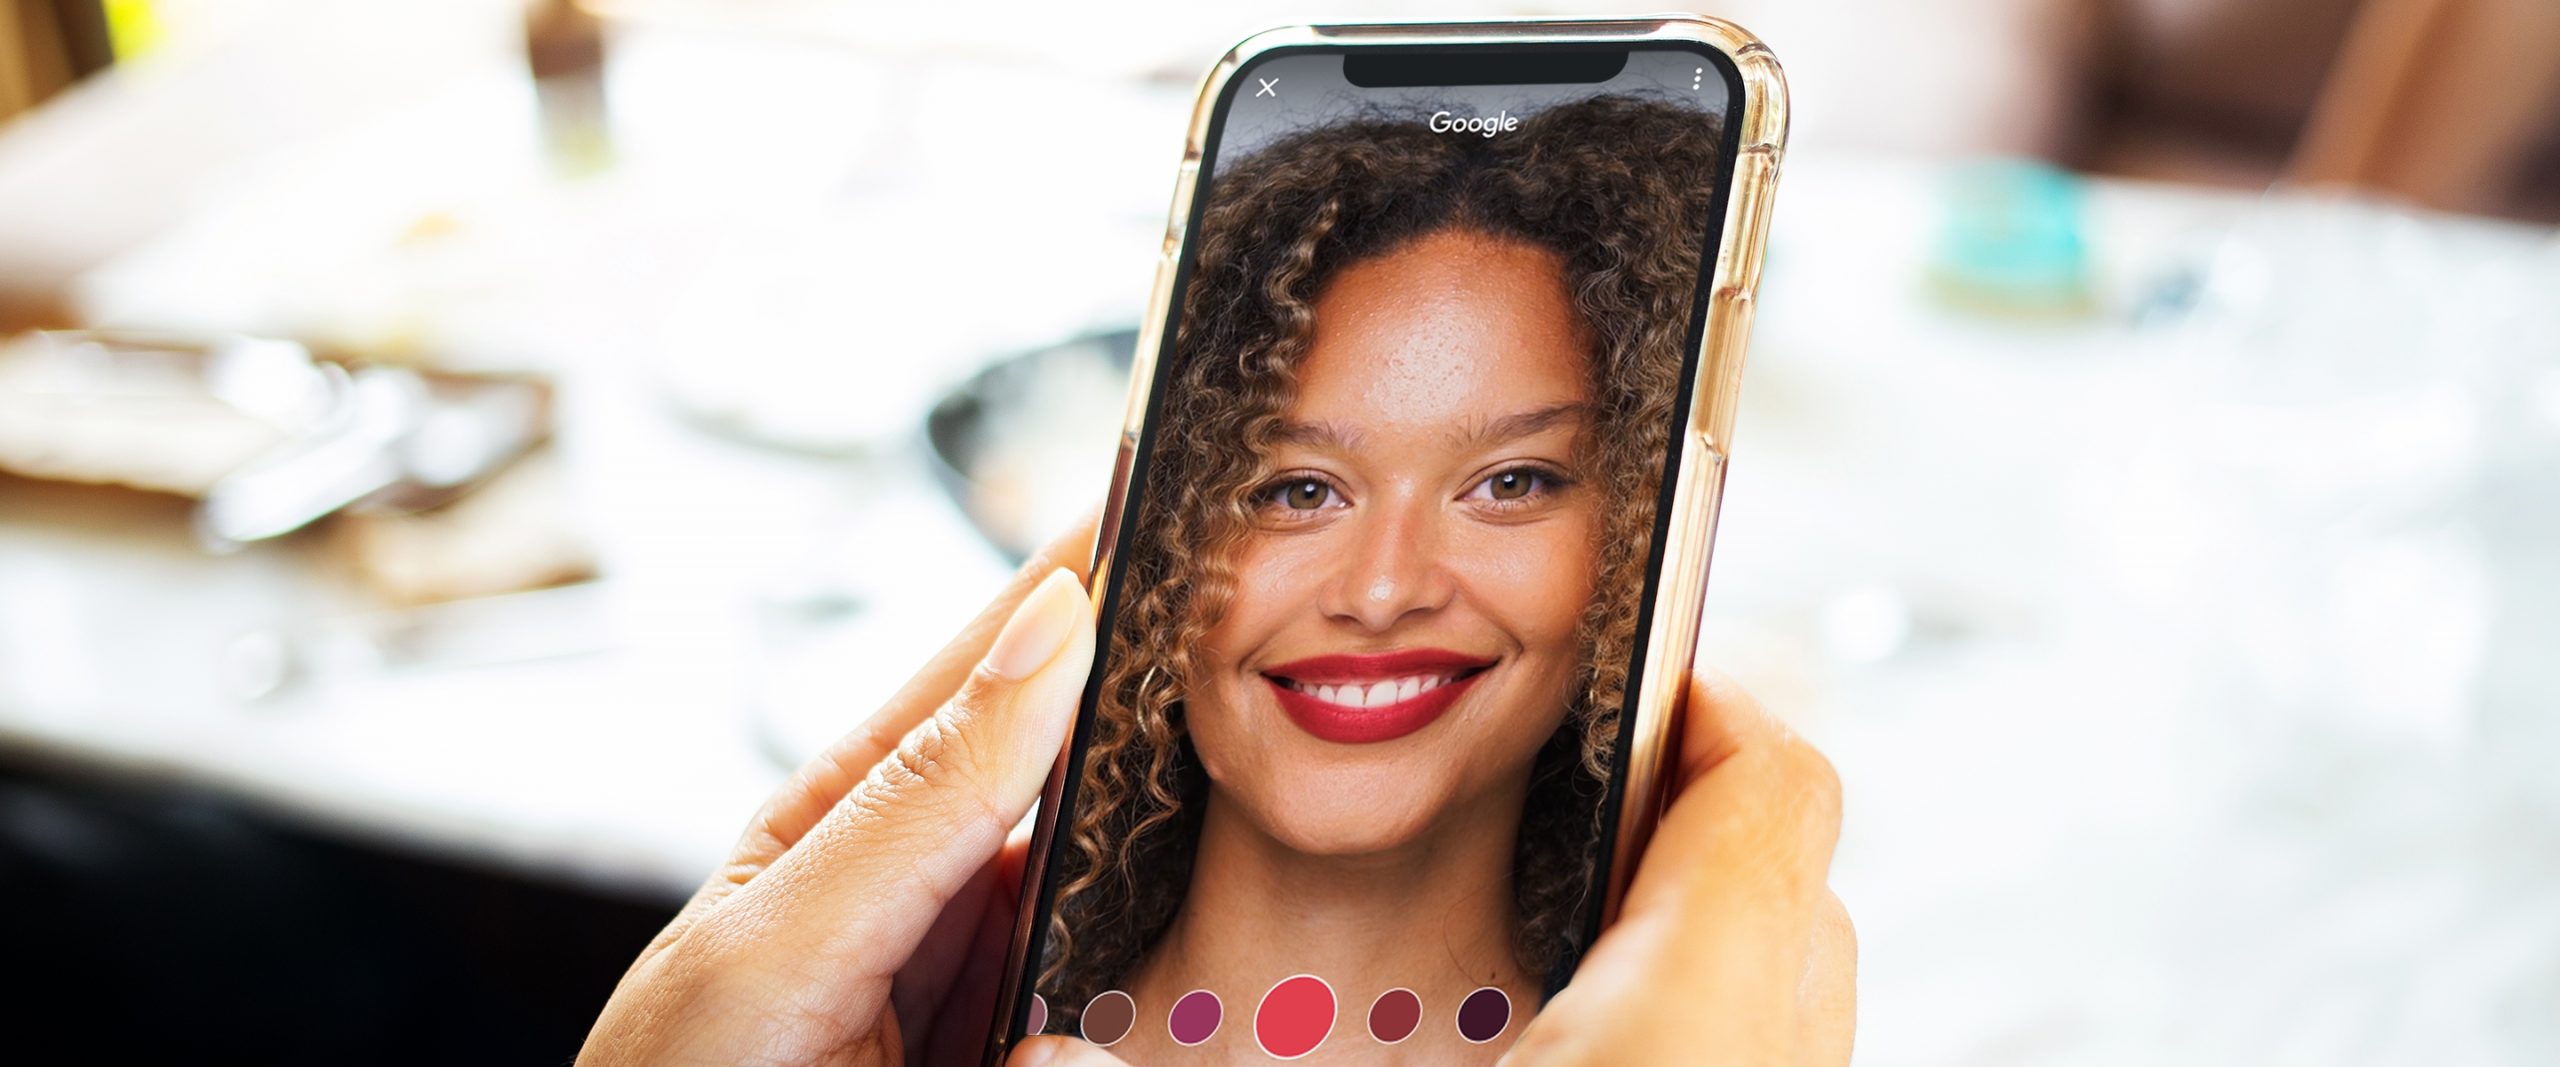 Google Creates Augmented Reality Beauty Experiences That Connect Customers, Brands | DeviceDaily.com